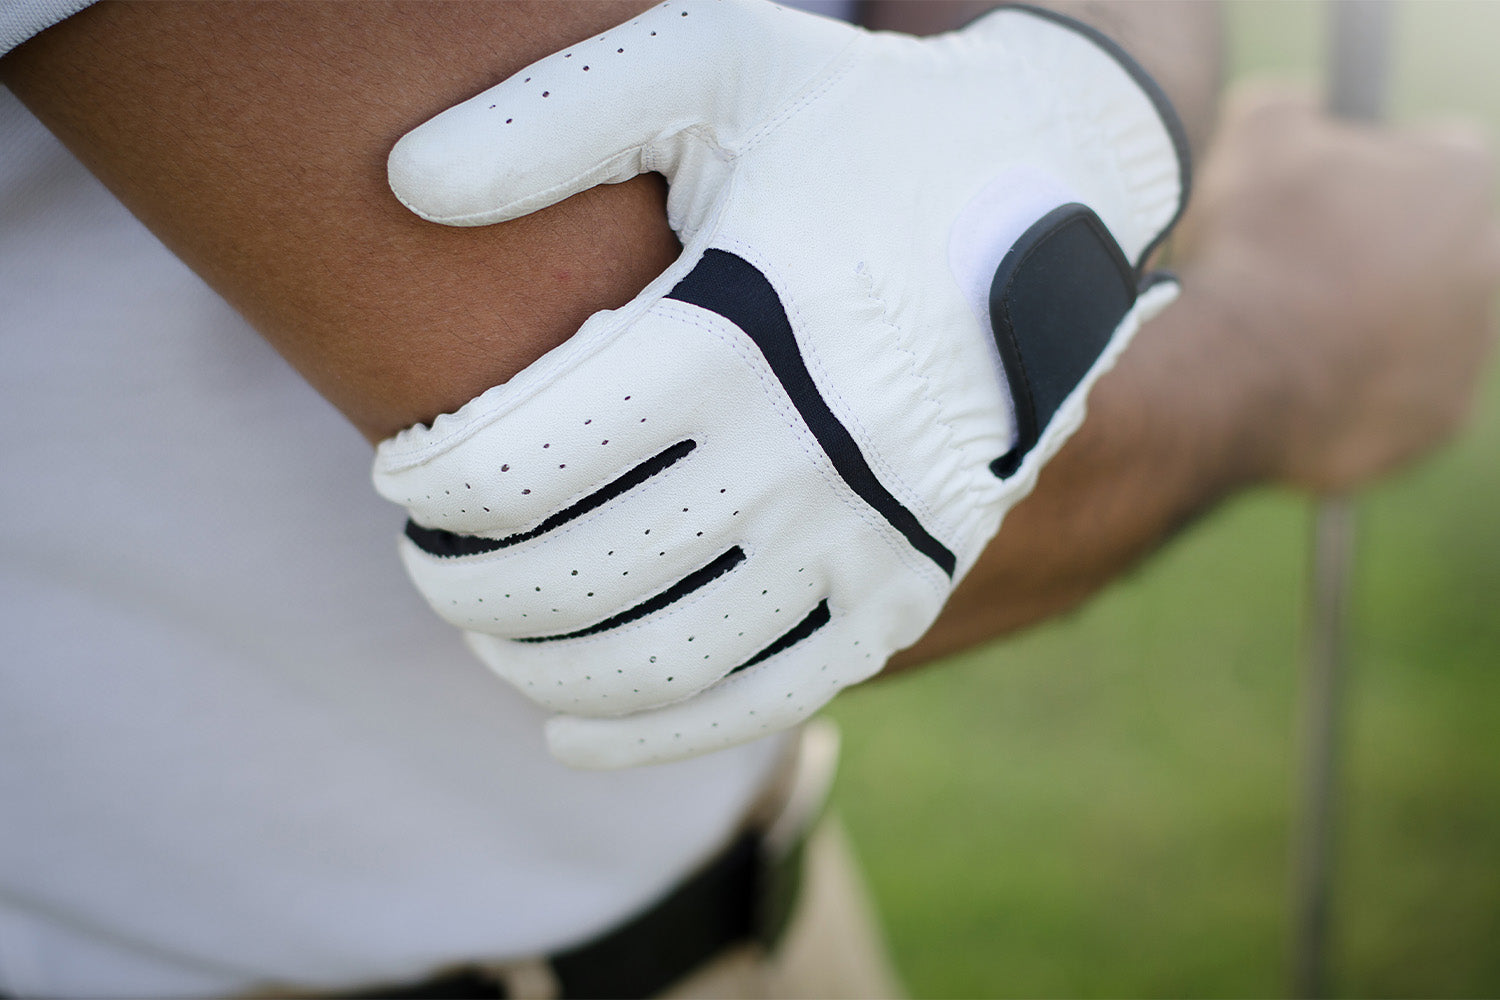 Injury Prevention: 5 Helpful Tips To Avoid Mistakes